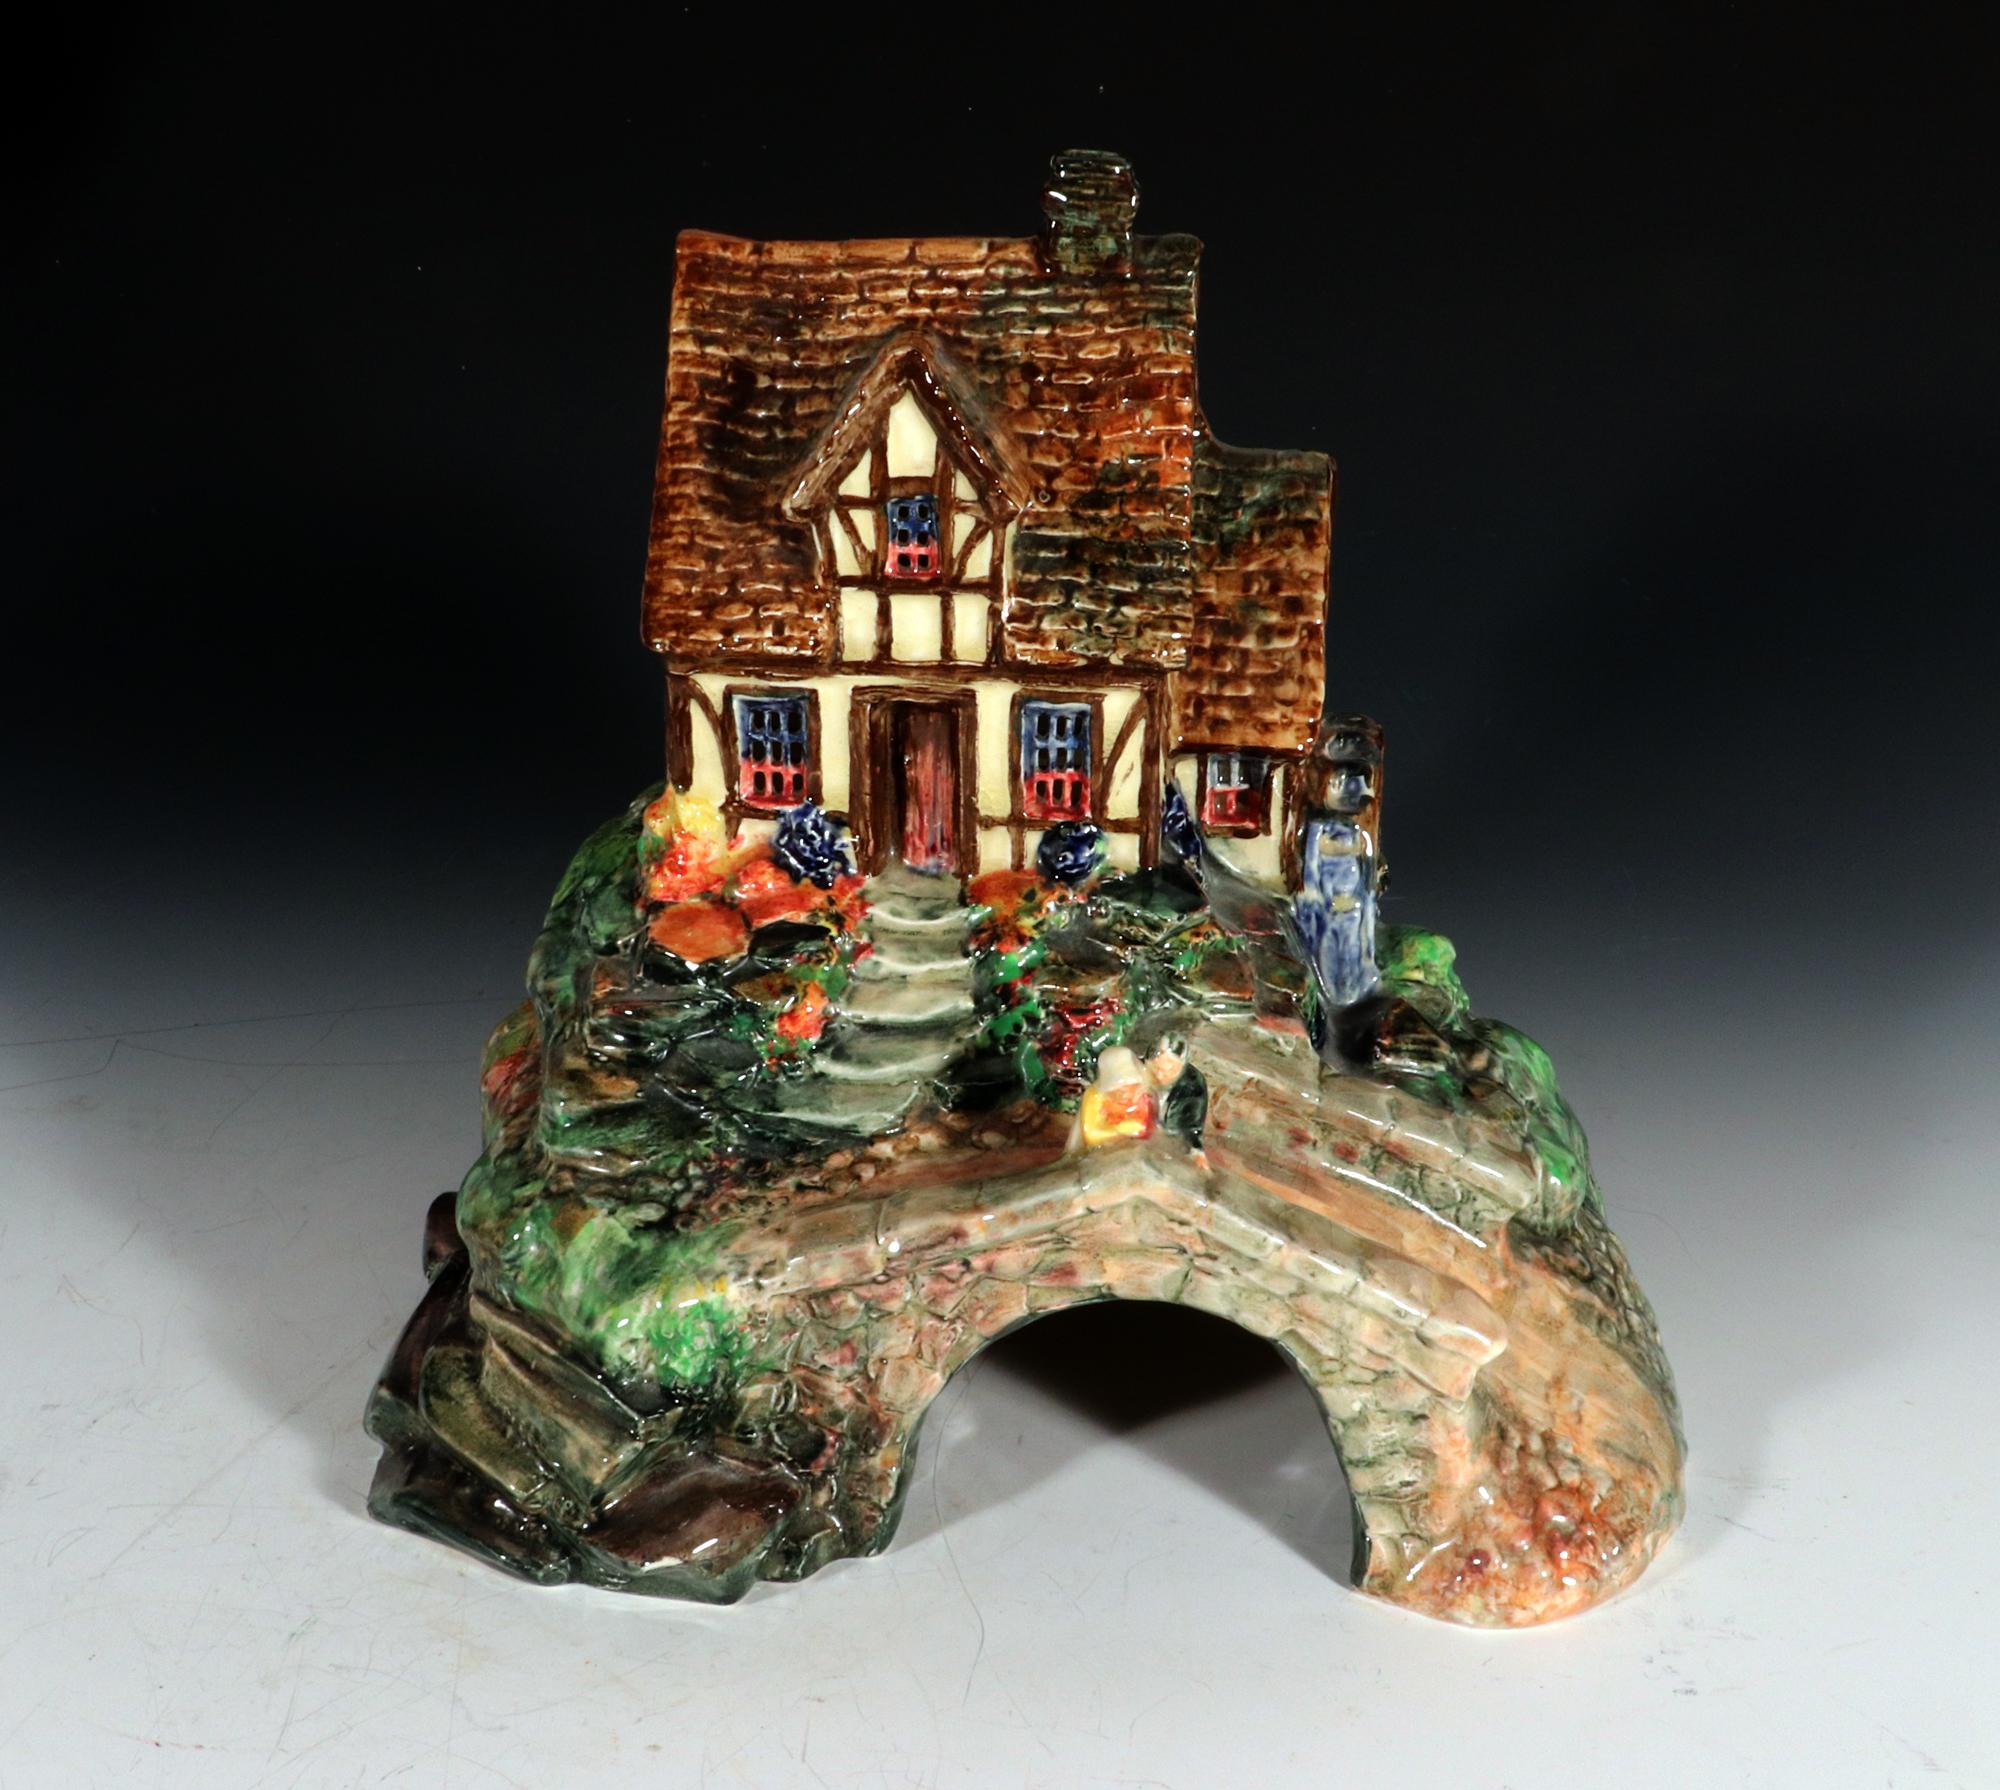 Royal Doulton Pastille Pottery Bastiile Burner Tudor Watermill and Cottage
Burslem,
1920s-30s

The Royal Doulton pottery pastiile burner is modeled as a Tudor watermill and cottage, with a man and woman standing upon the highly detailed cobbled